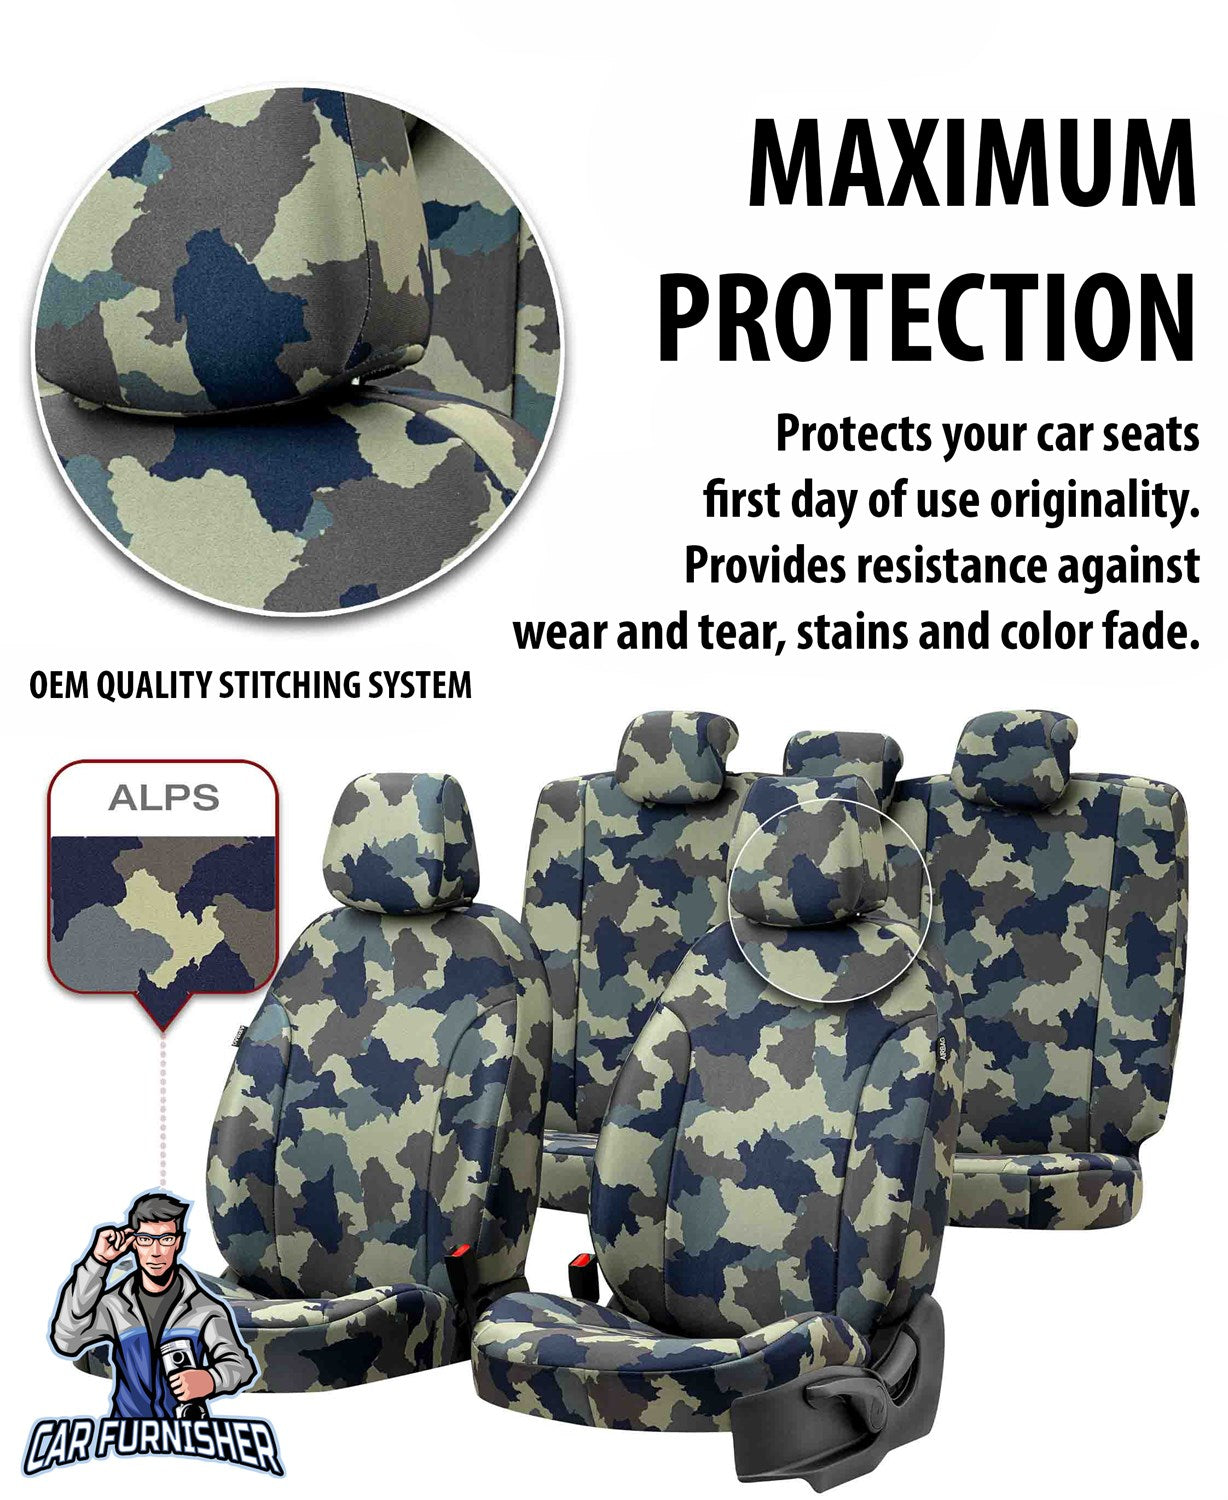 Dfm Succe Seat Covers Camouflage Waterproof Design Montblanc Camo Waterproof Fabric